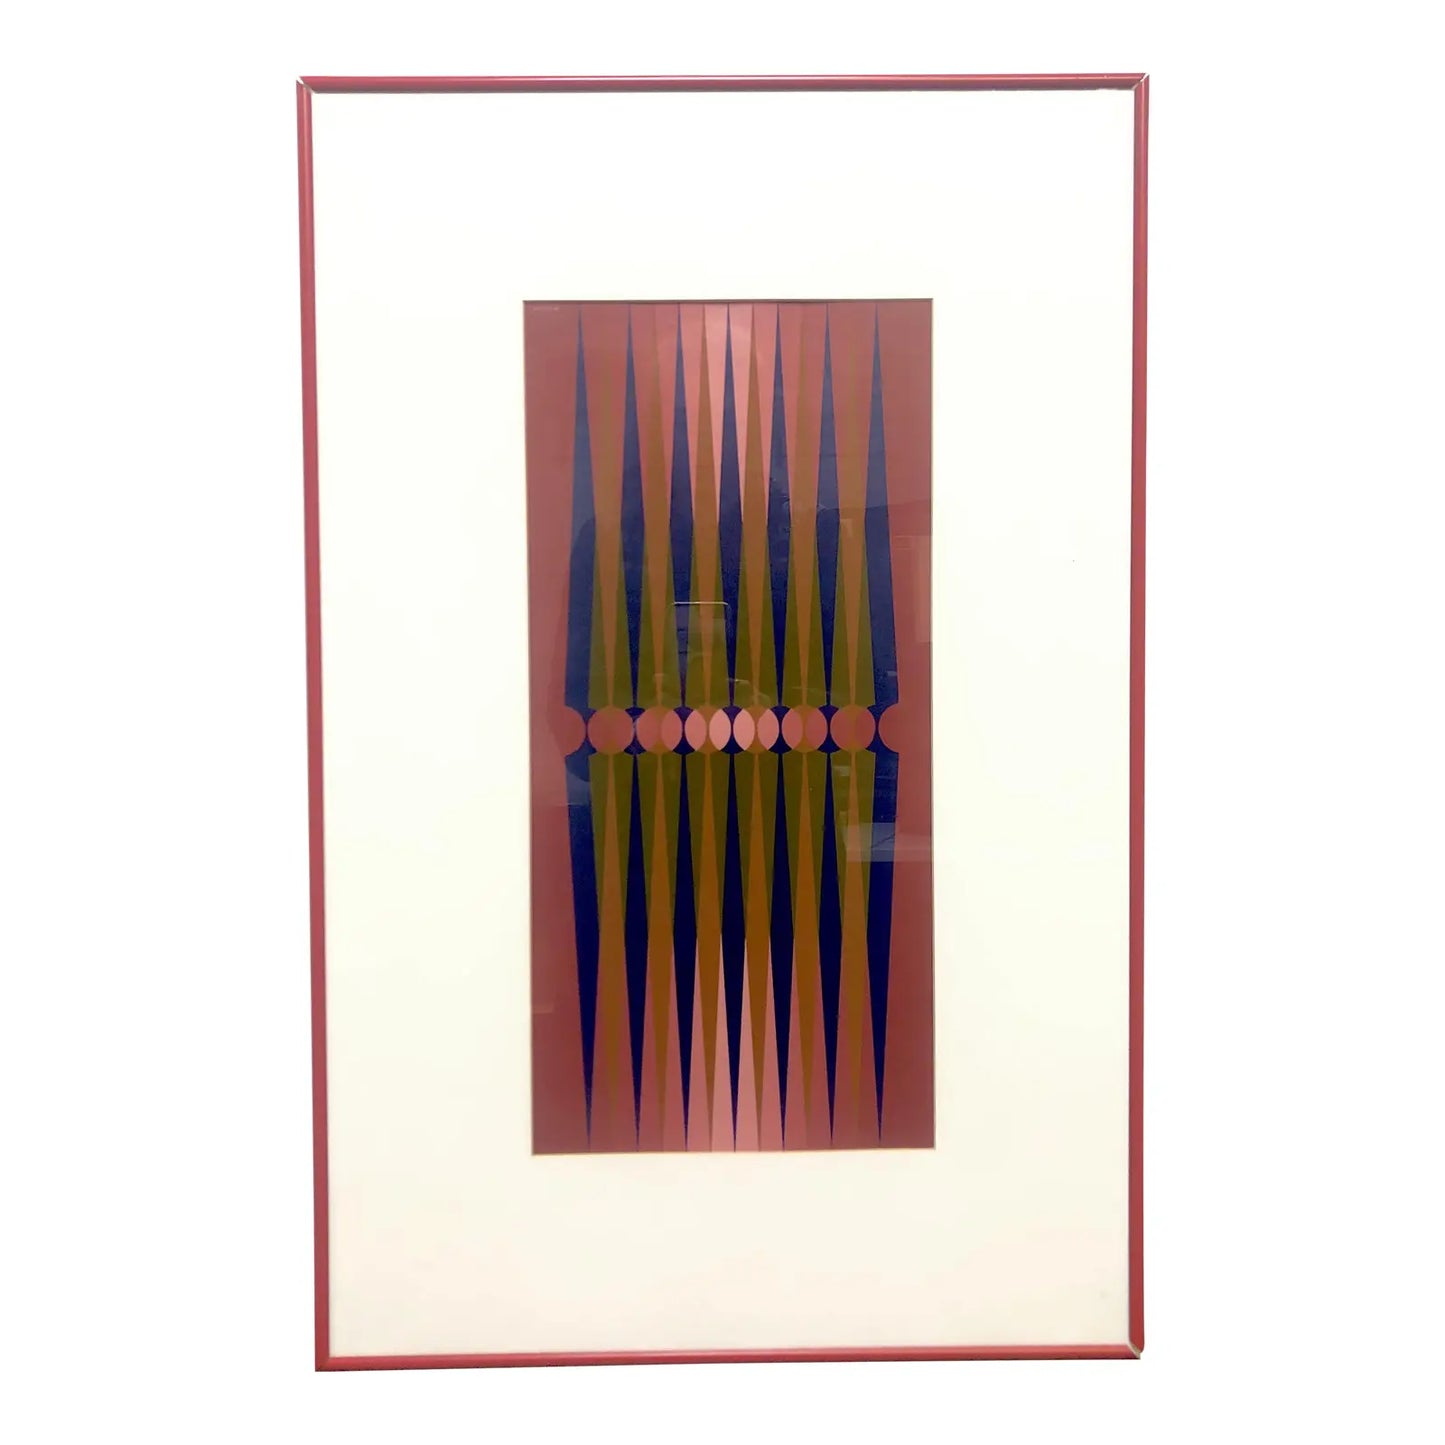 1970S OP ART PRINT BY DORDEVIC MIODRAG ON ACRYLIC PAPER